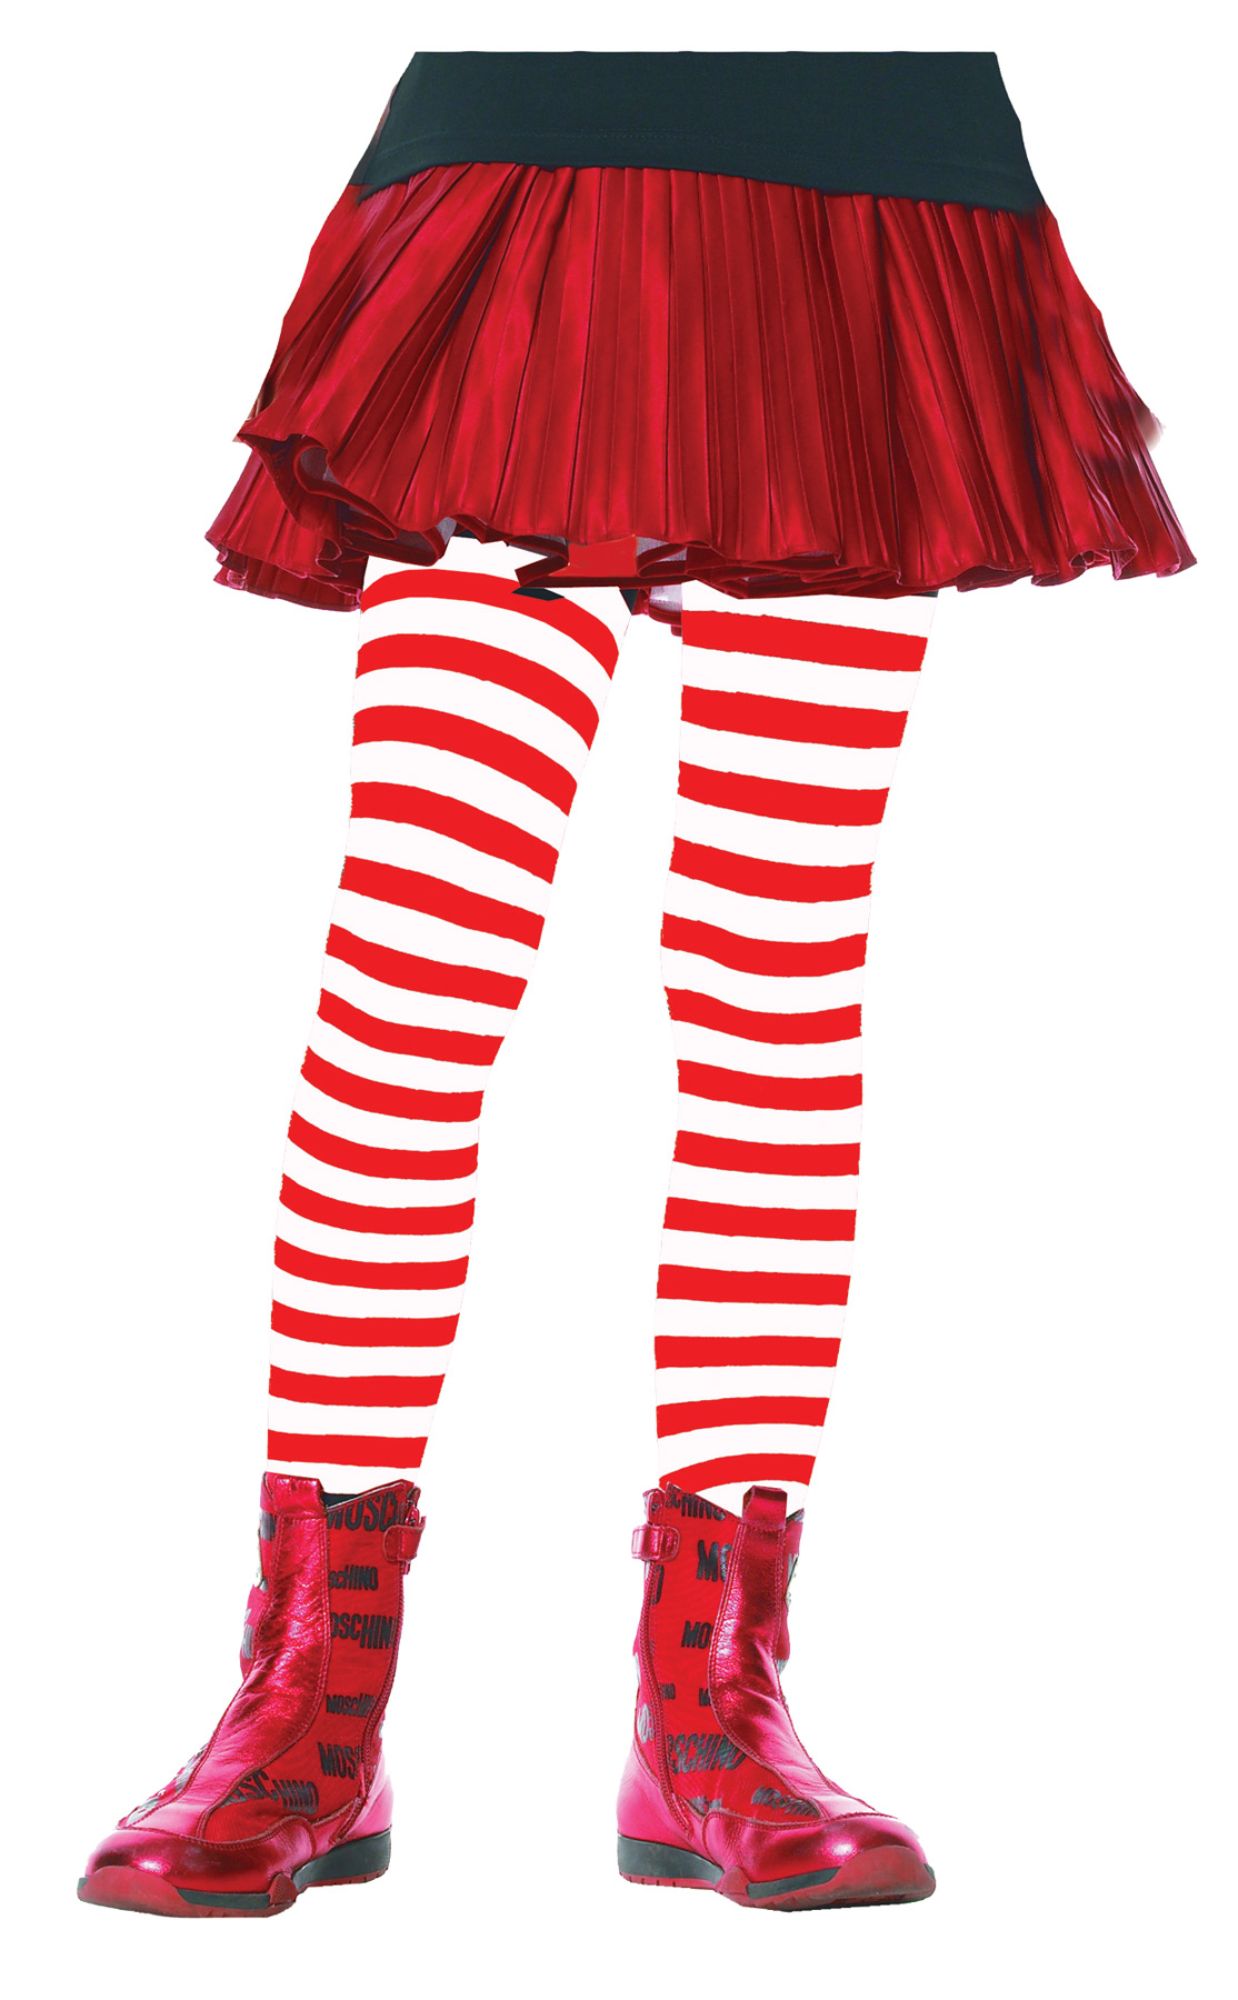 The Costume Center Red and White Striped Tights Girl Child